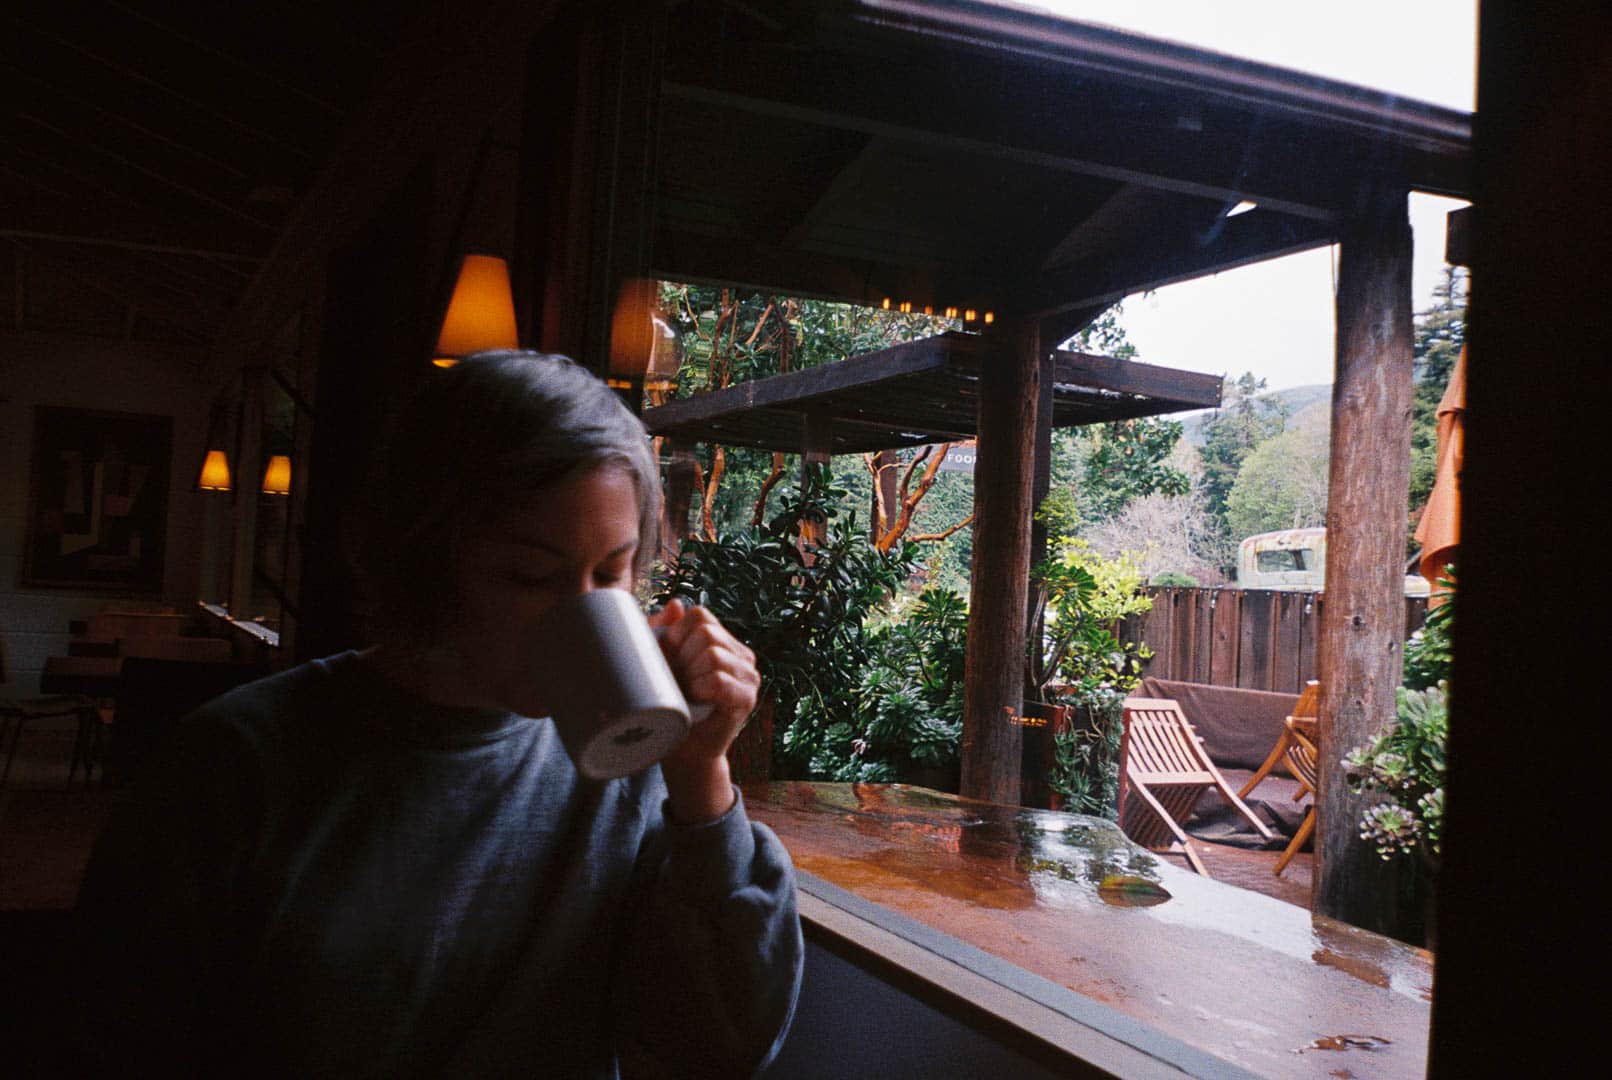 A woman sipping coffee next to a window overlooking a lush and damp garden area